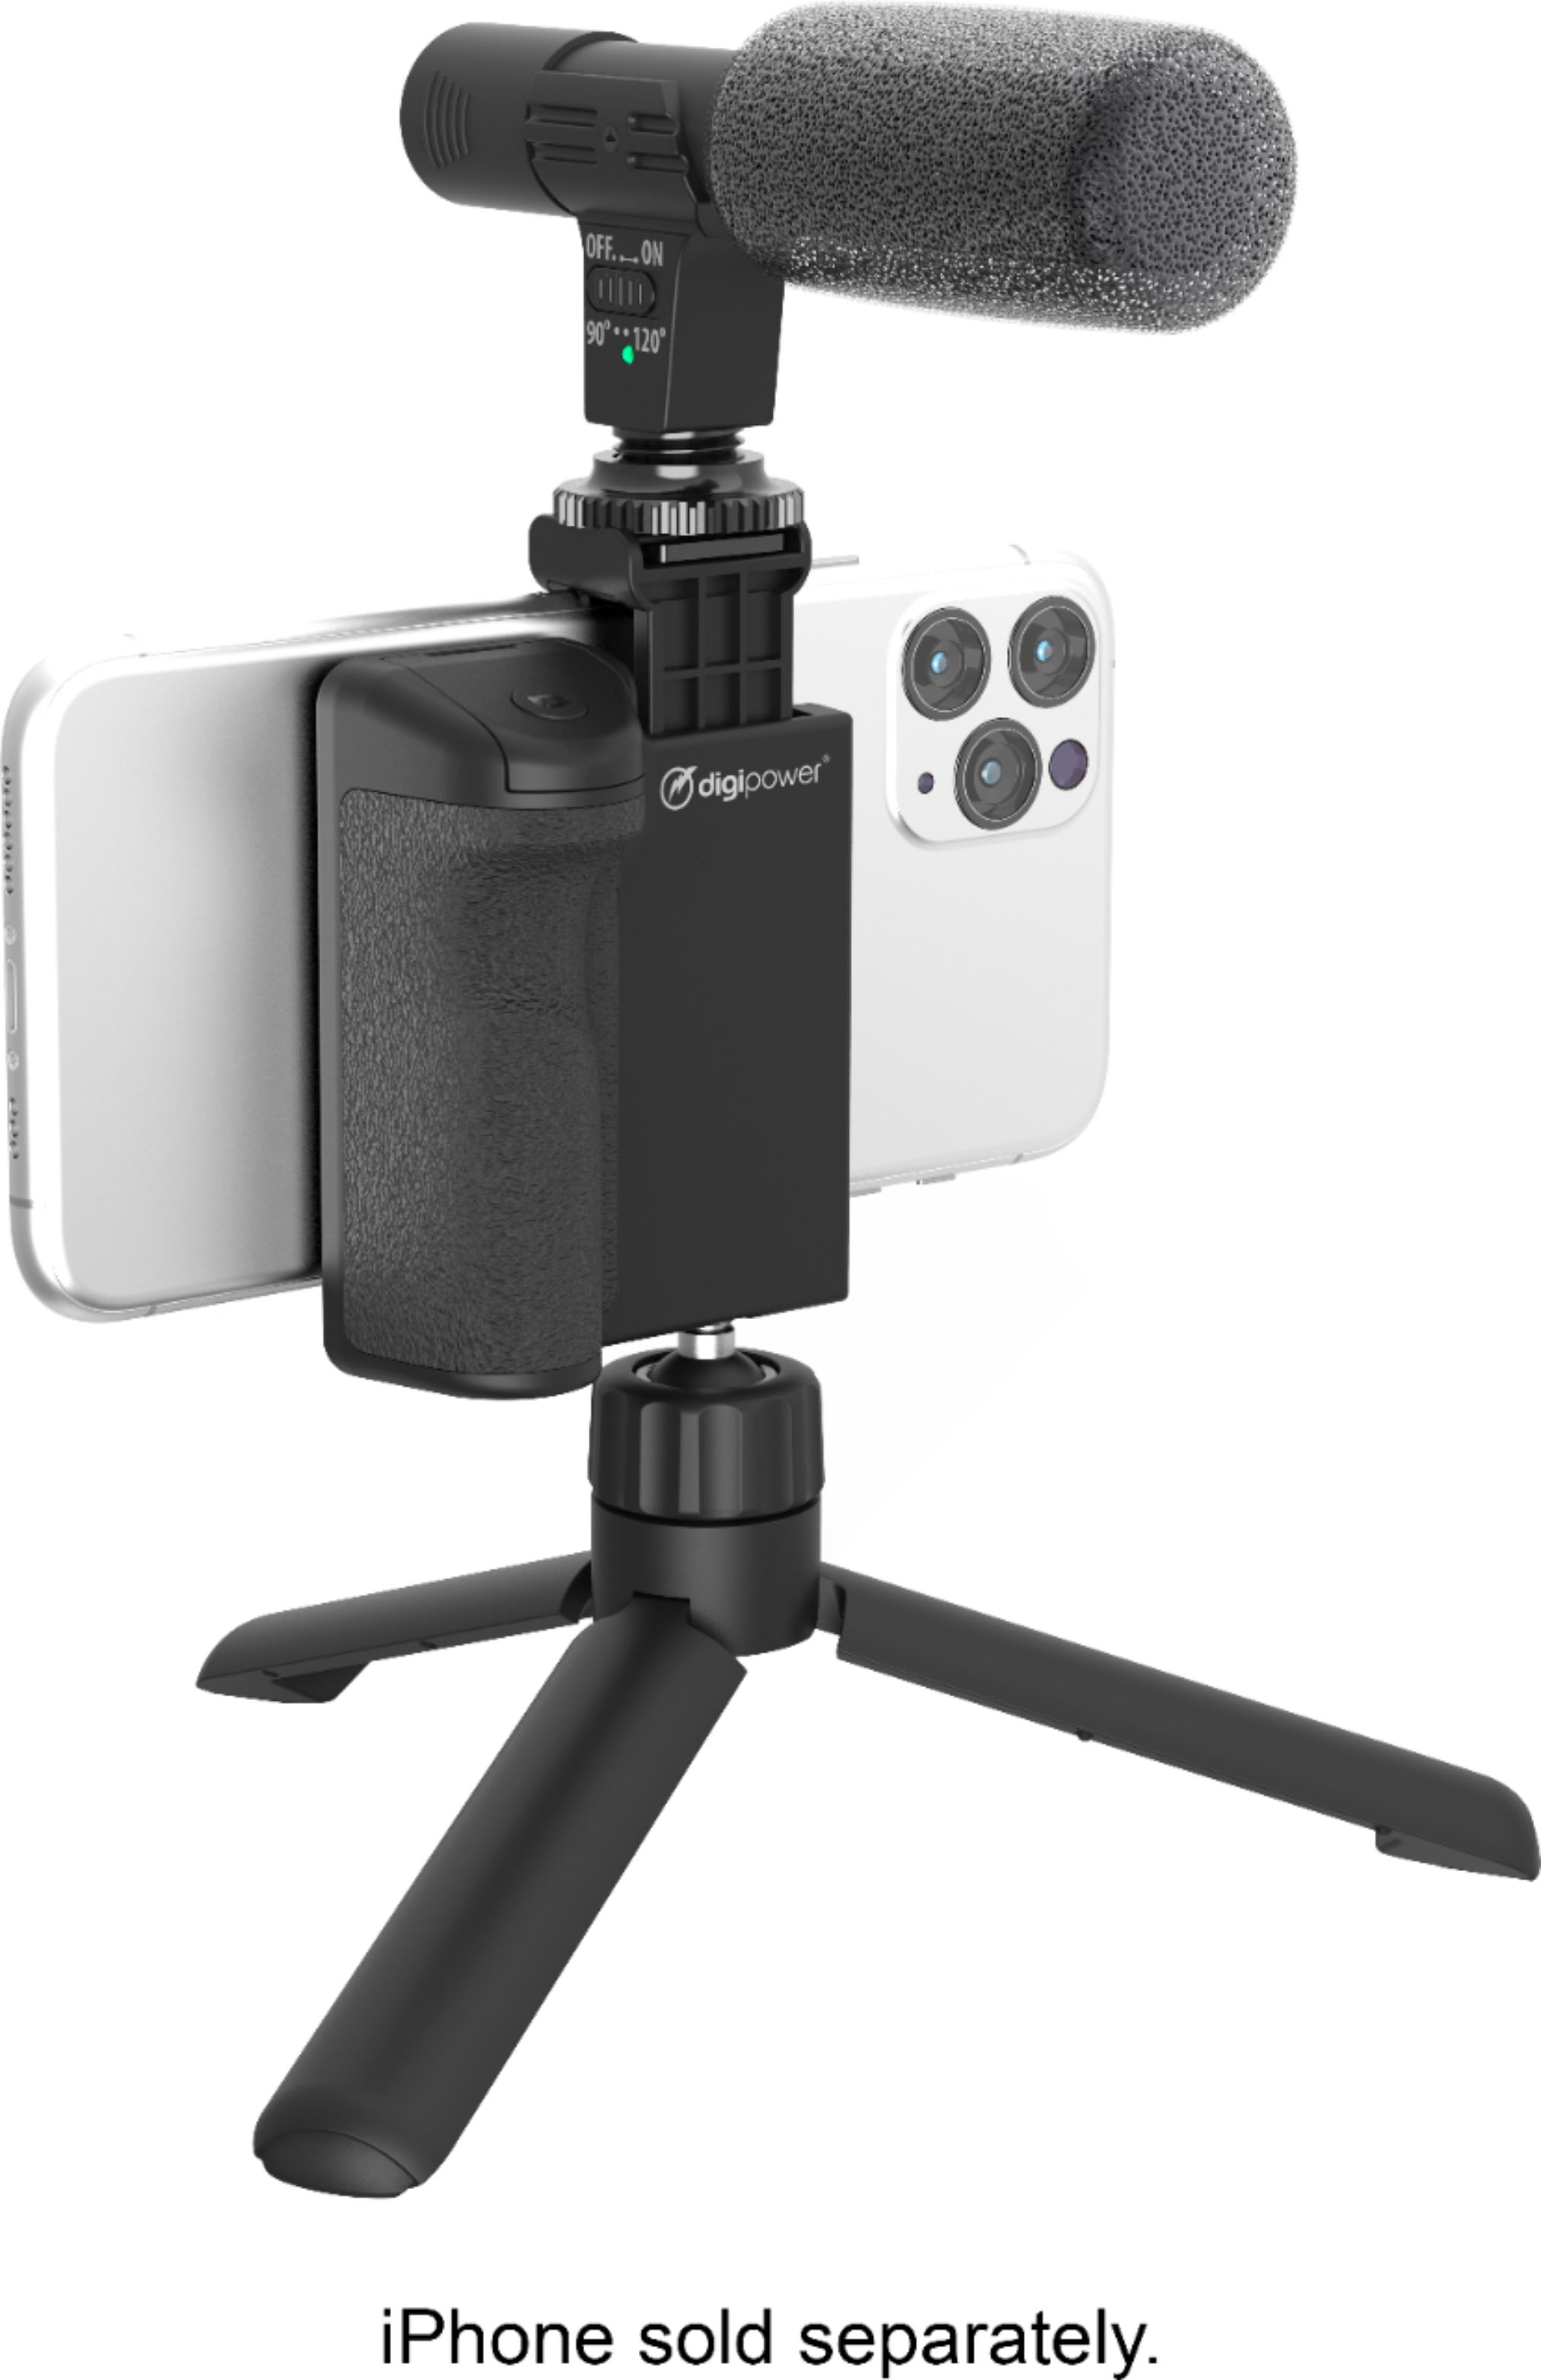 Digipower Multi-function Stand with Smartphone, Camera, Light & Microphone Mount